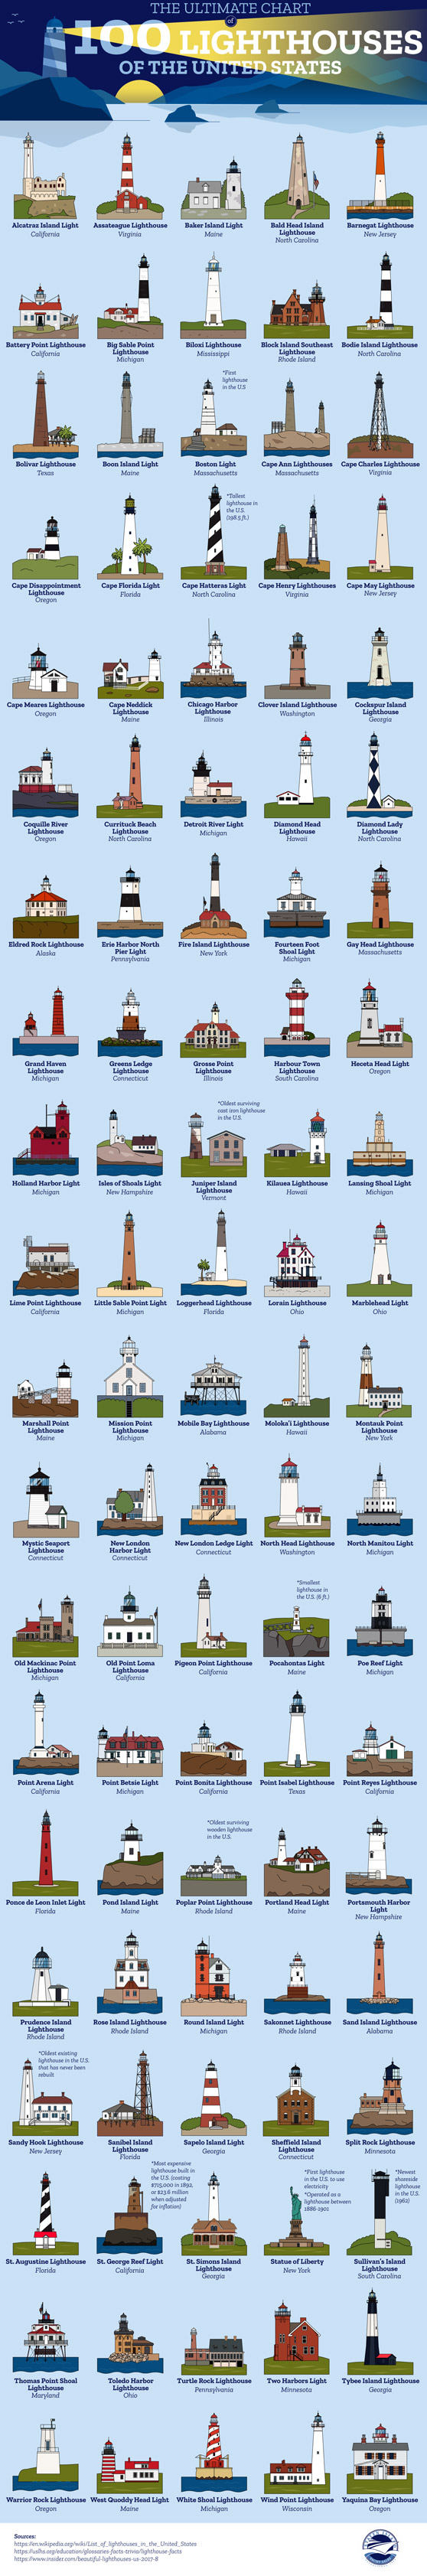 100 Lighthouses of the United States [Infographic] - Best Infographics